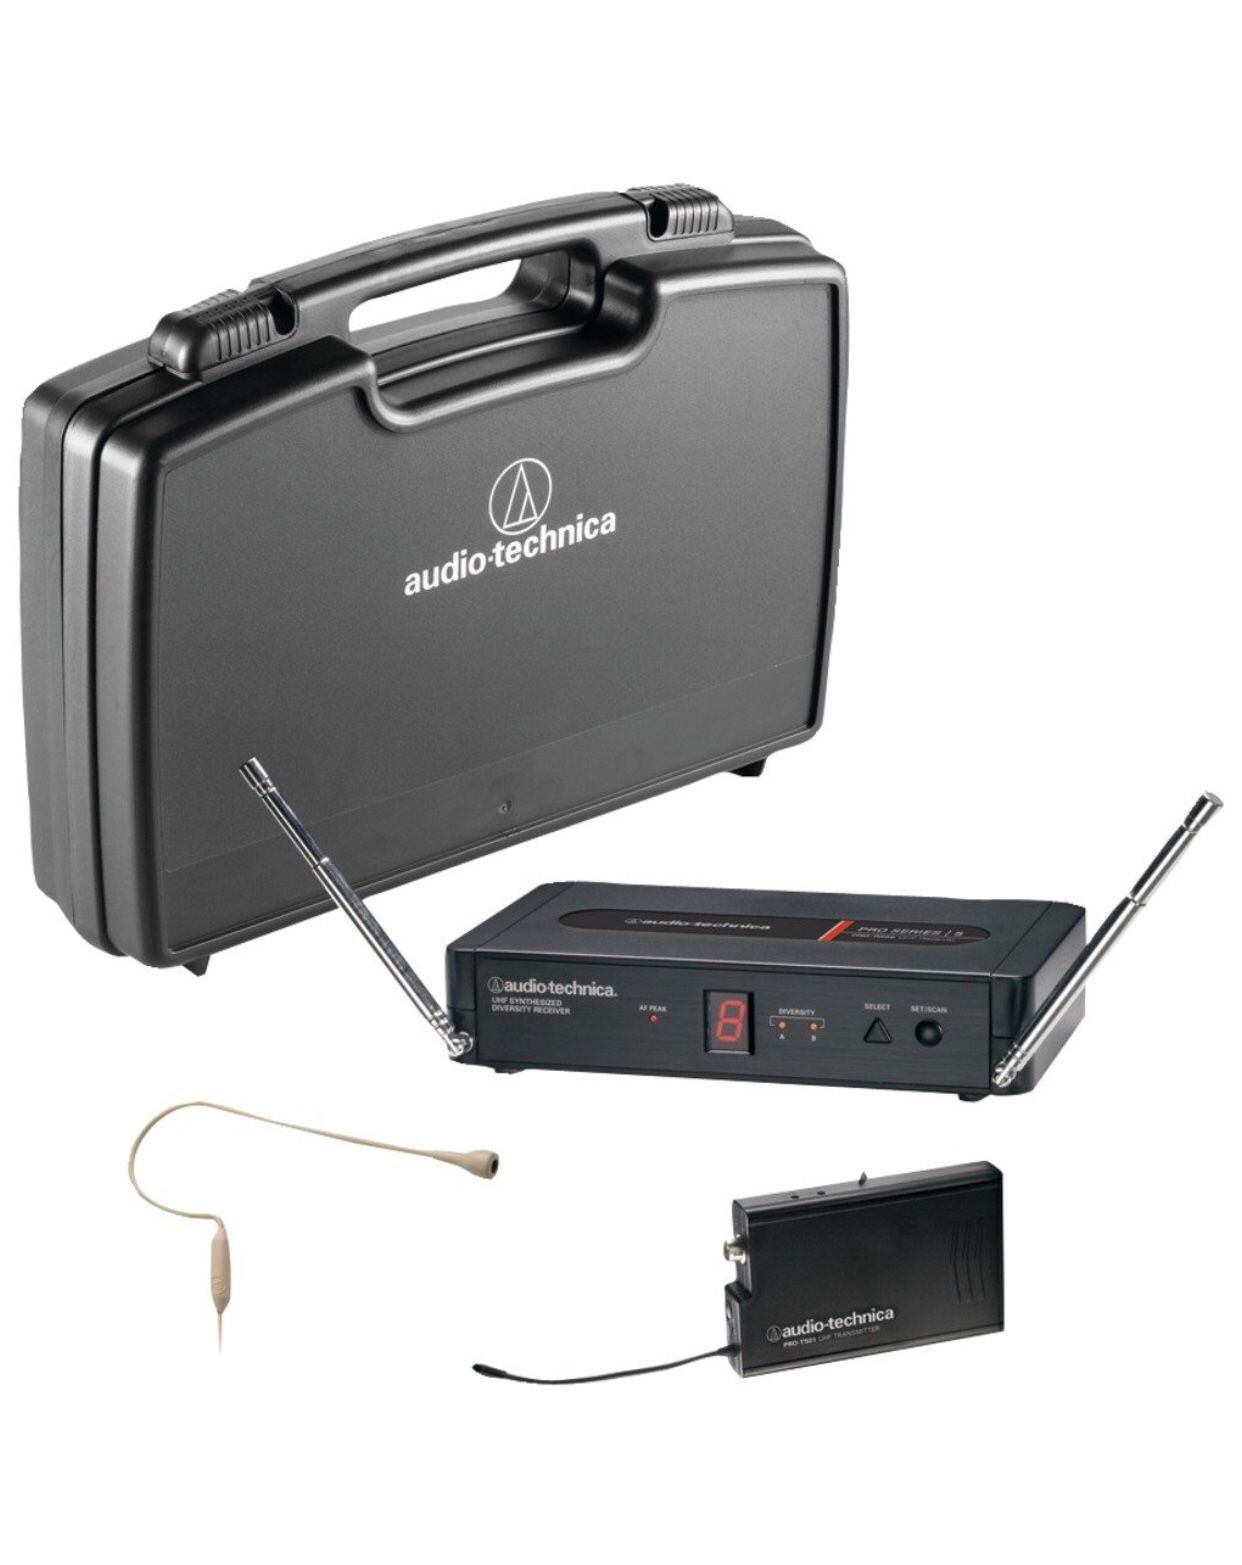 Audio-Technica PRO-501/H92-TH Pro Series 5 Frequency-Agile Diversity UHF Wireless Headworn Microphone System